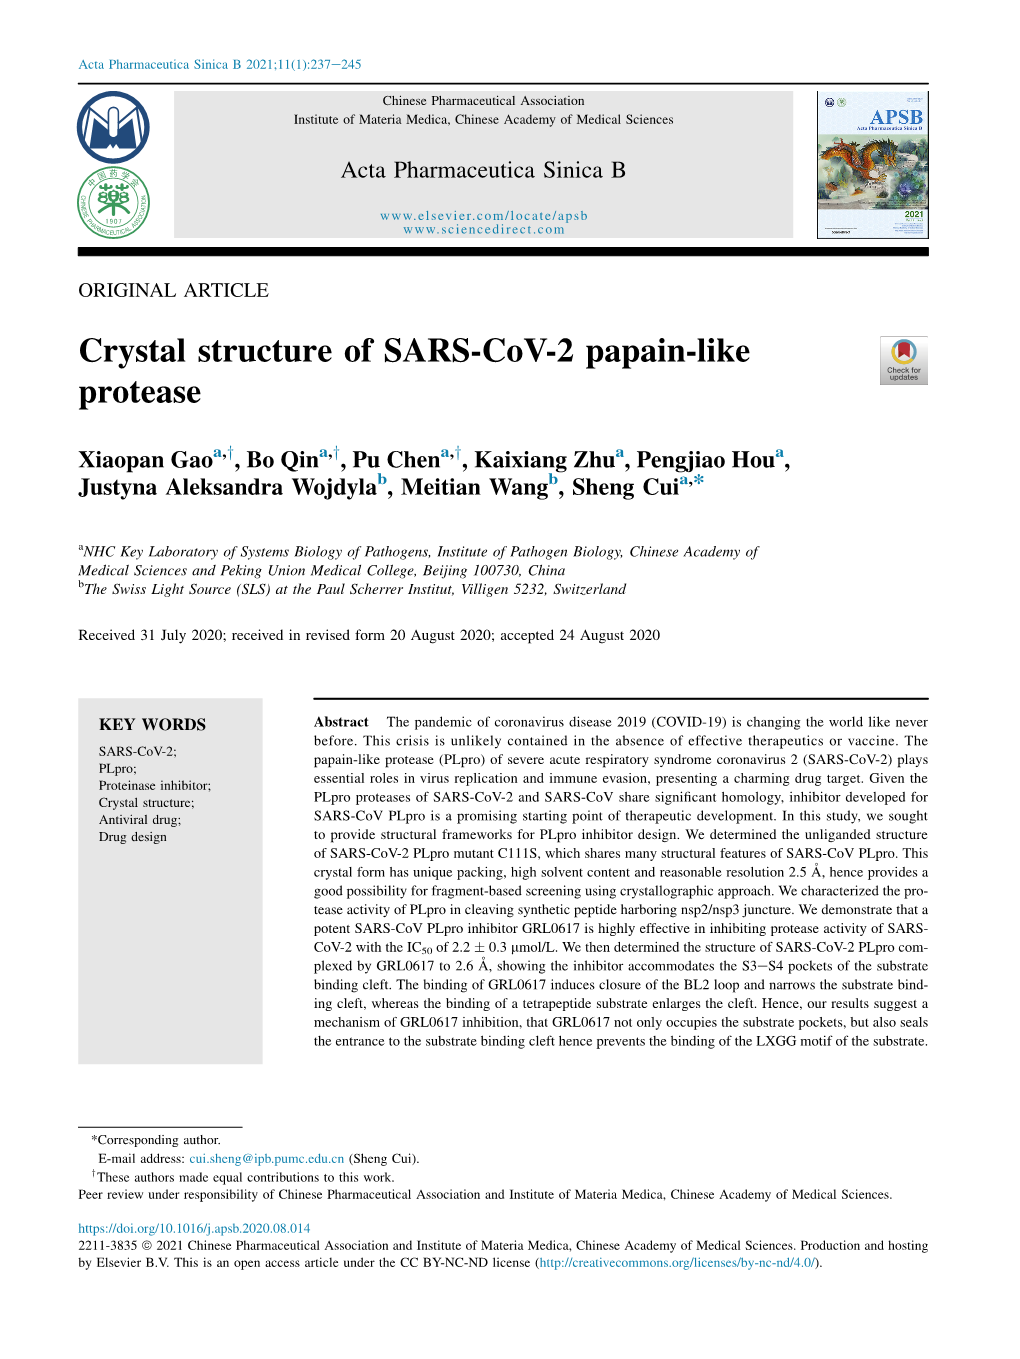 Crystal Structure of SARS-Cov-2 Papain-Like Protease